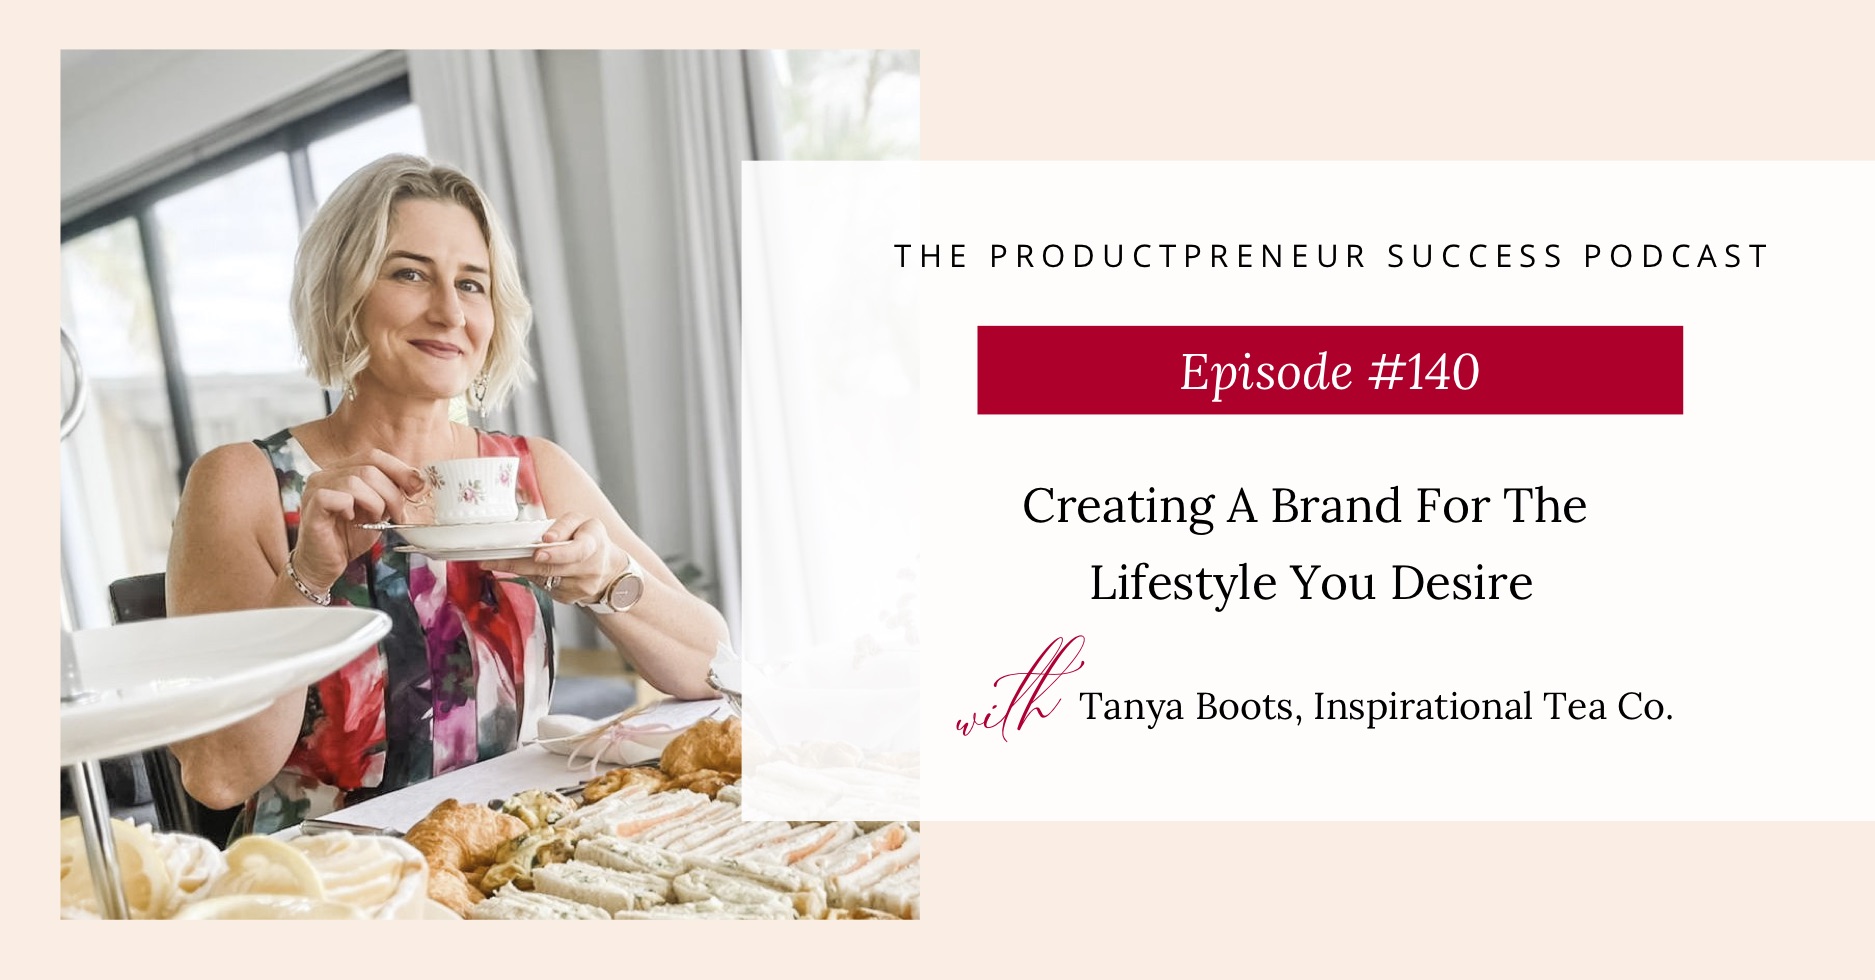 Podcast Interview with Tanya Boots